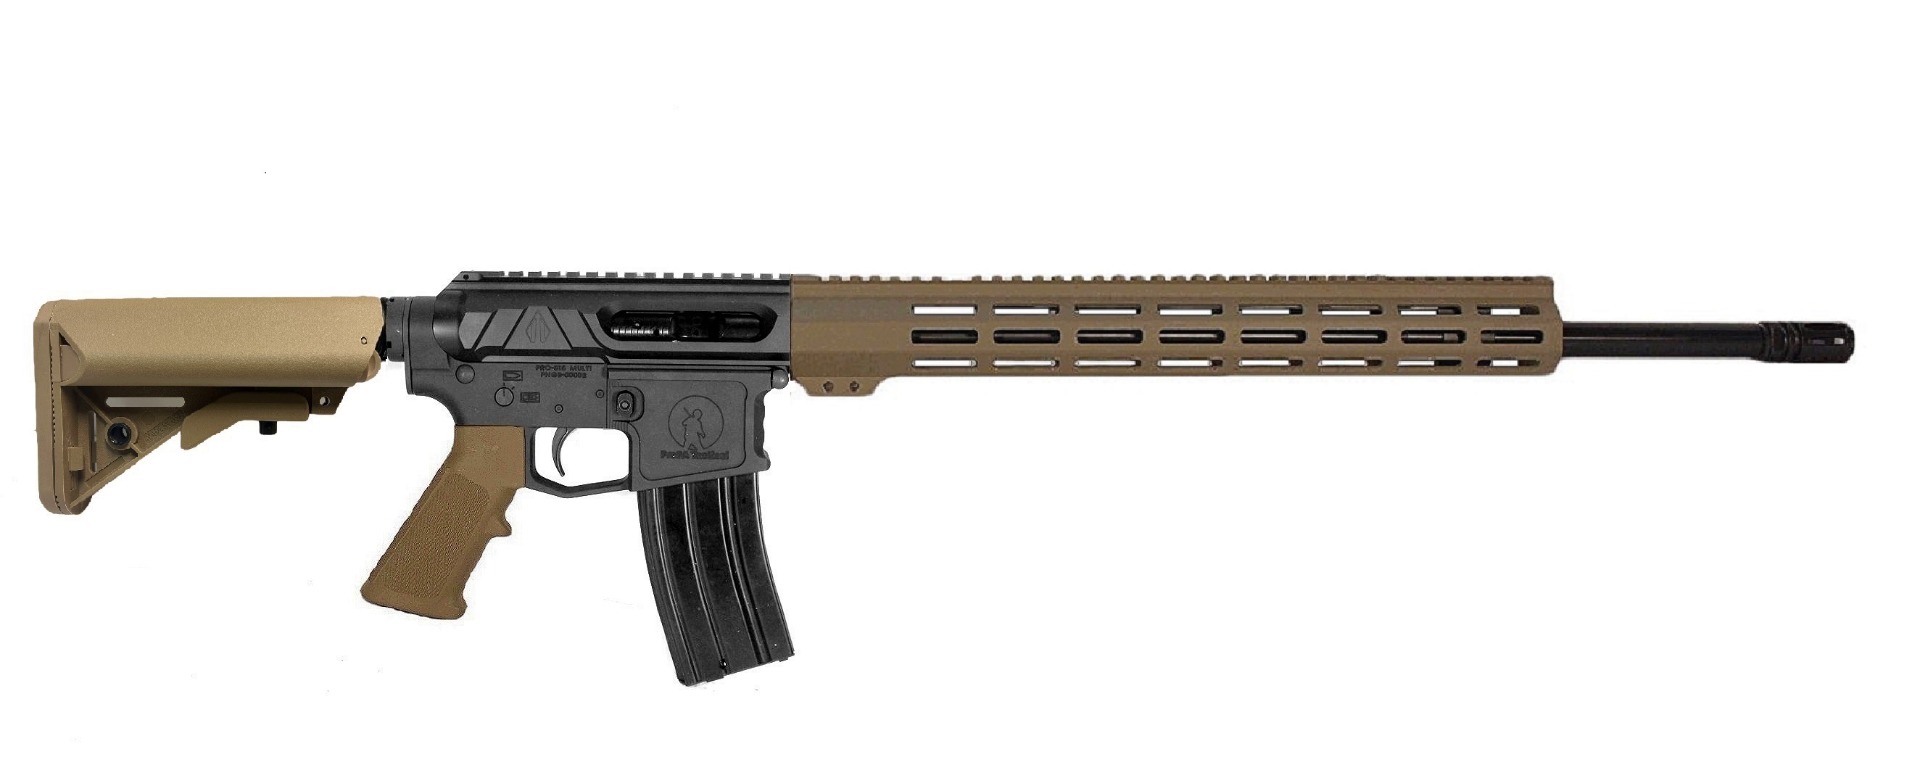 20 inch 224 Valkyrie Complete AR Rifle